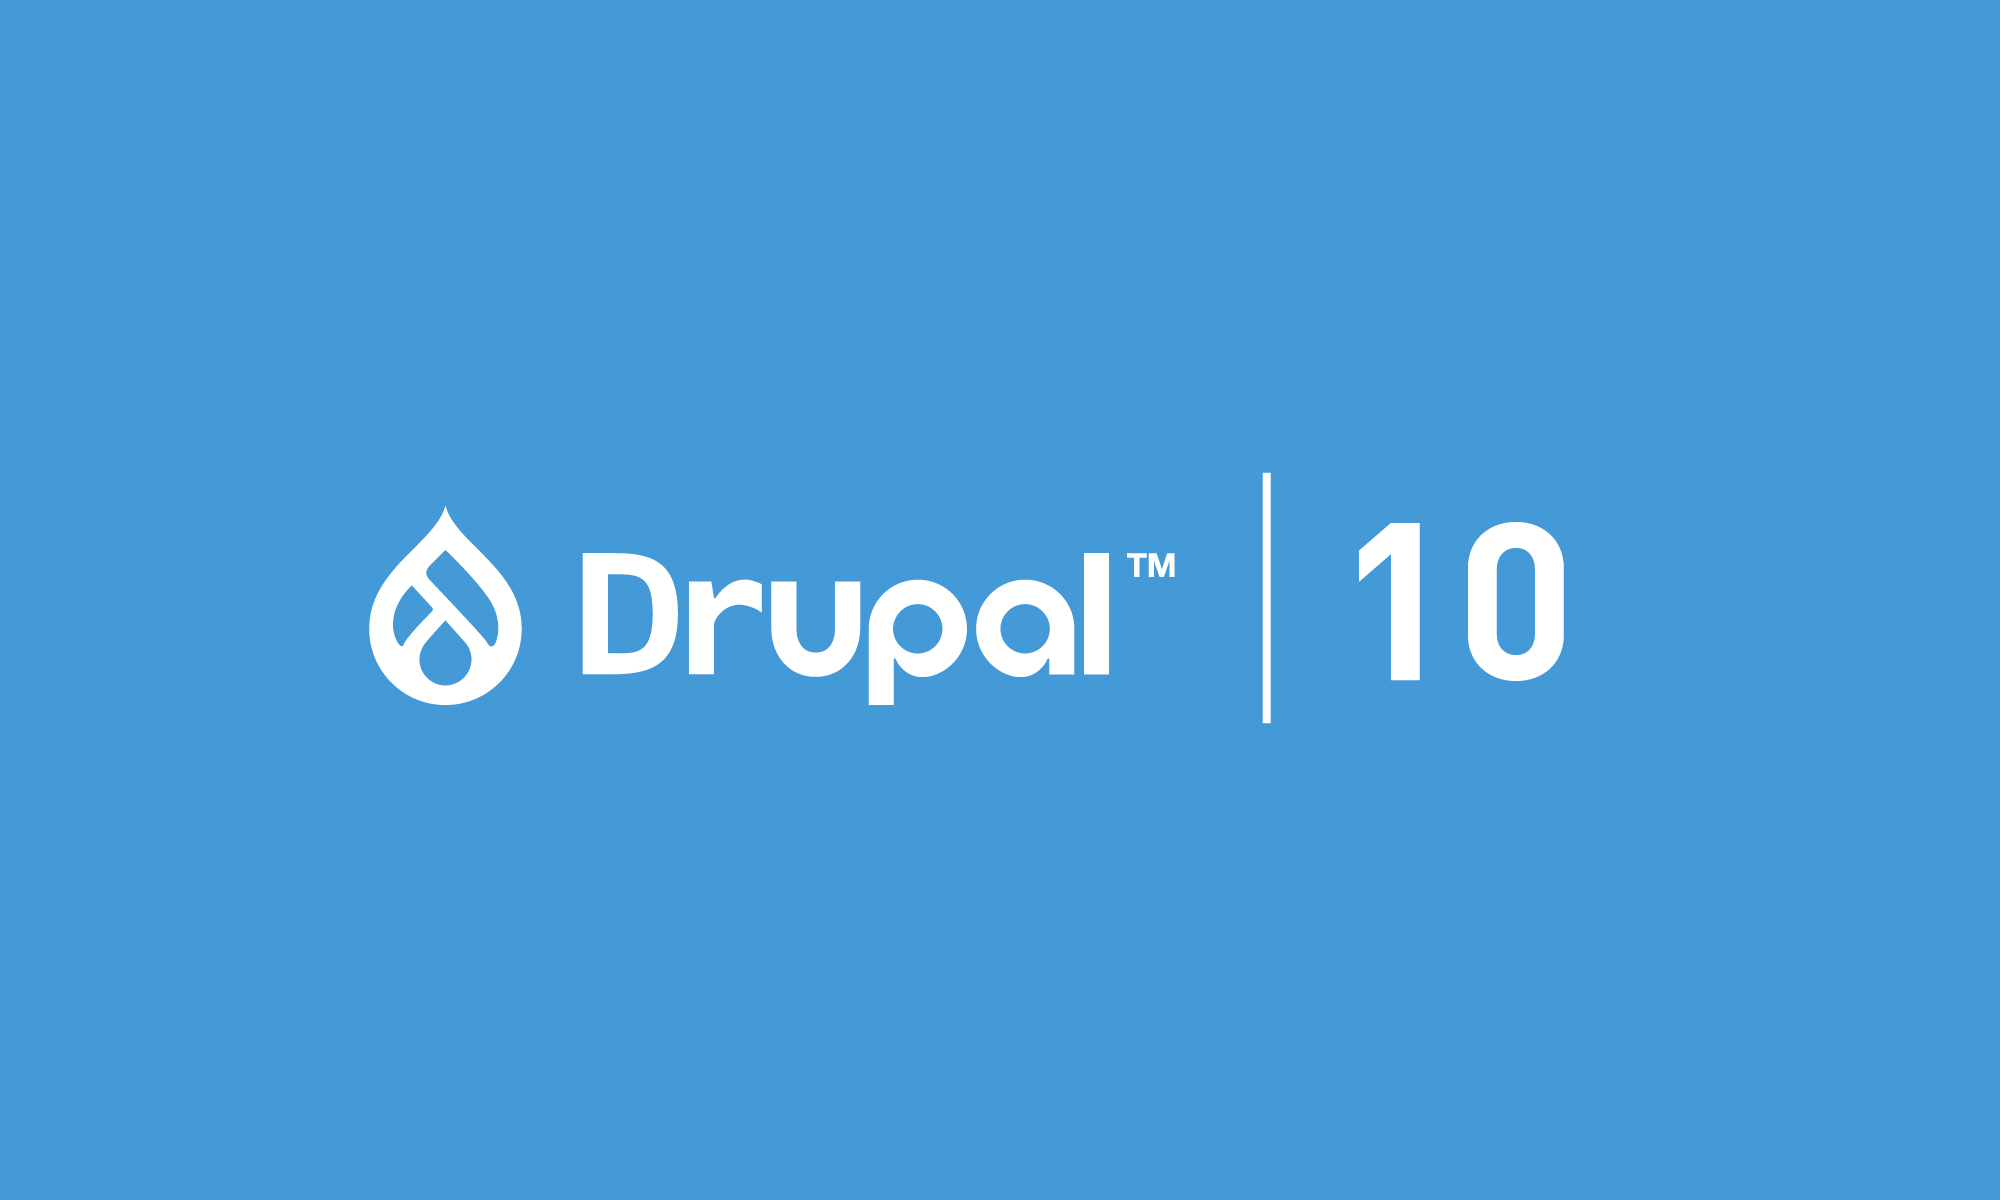 Yes, upgrading to Drupal 10 is necessary